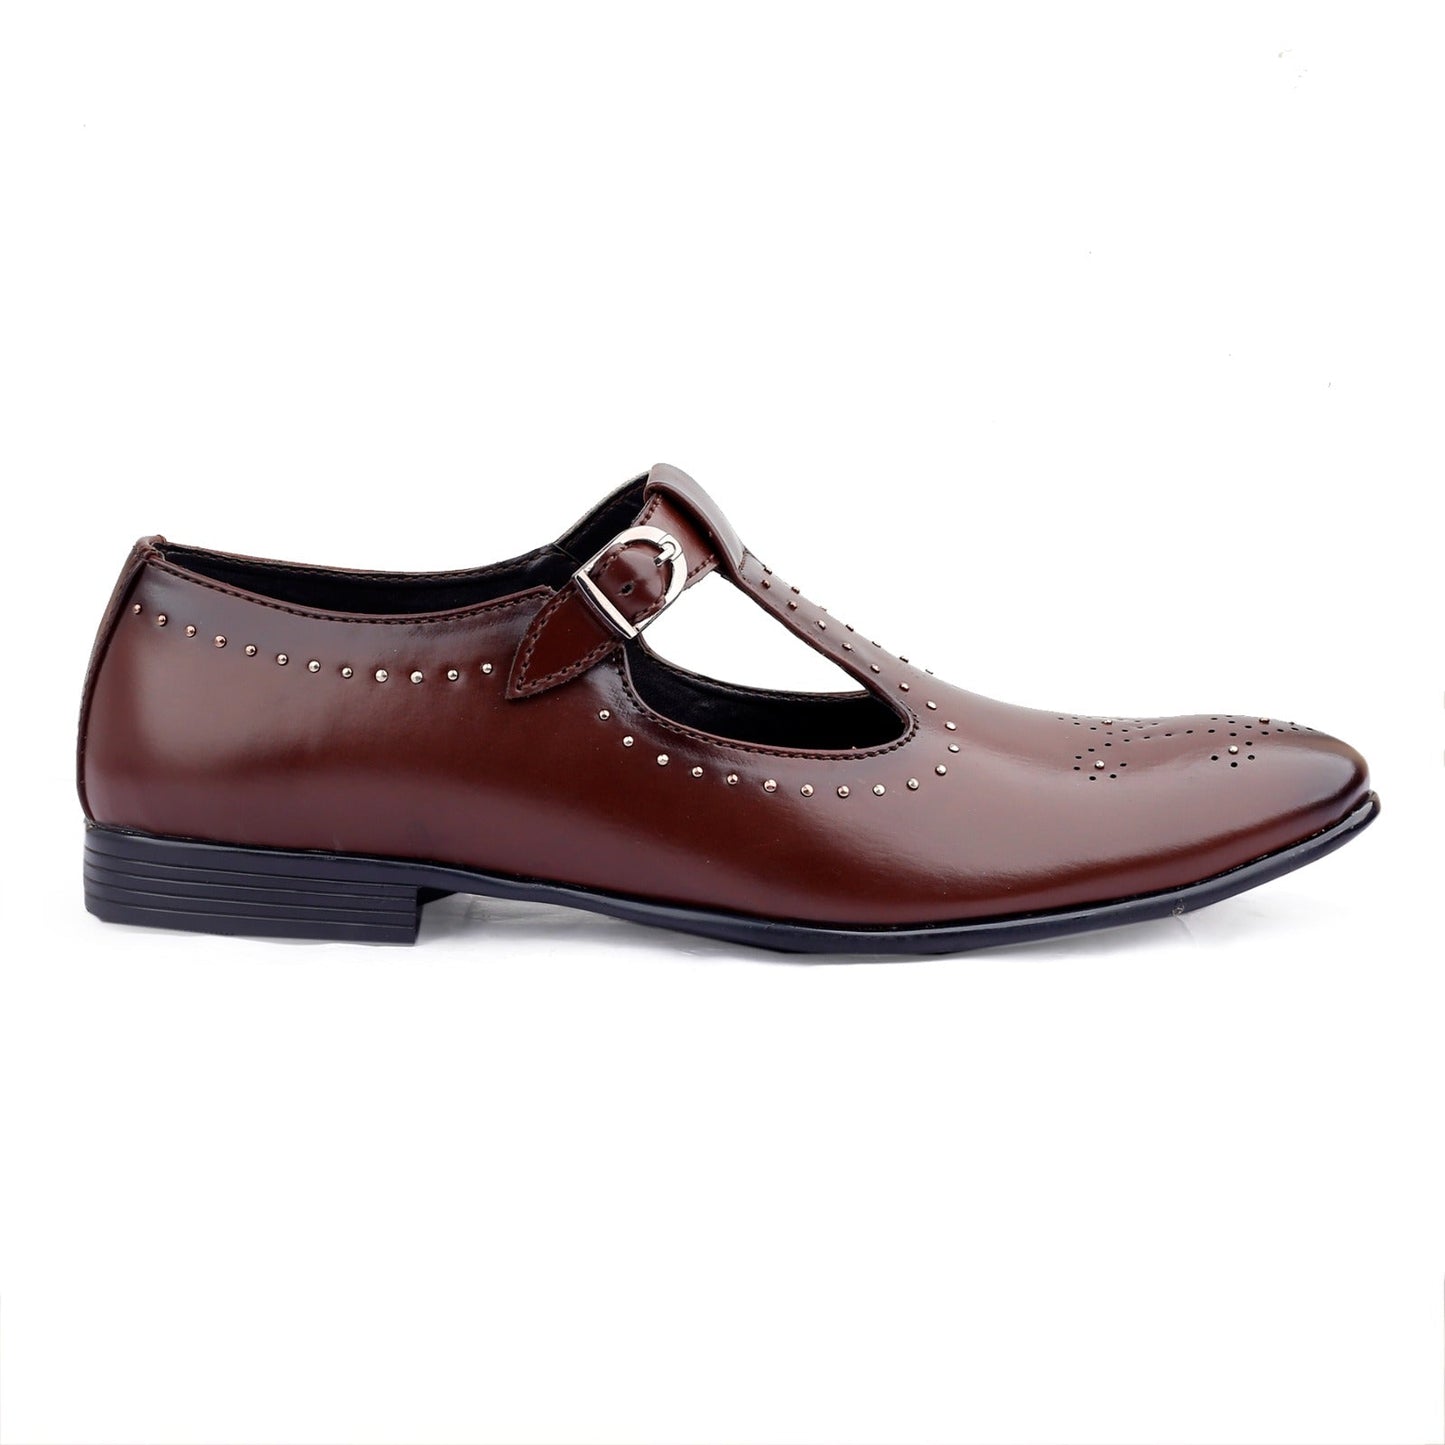 Buy Now Stylish Peshawari Shoes For Partywear And Casualwear - JackMarc